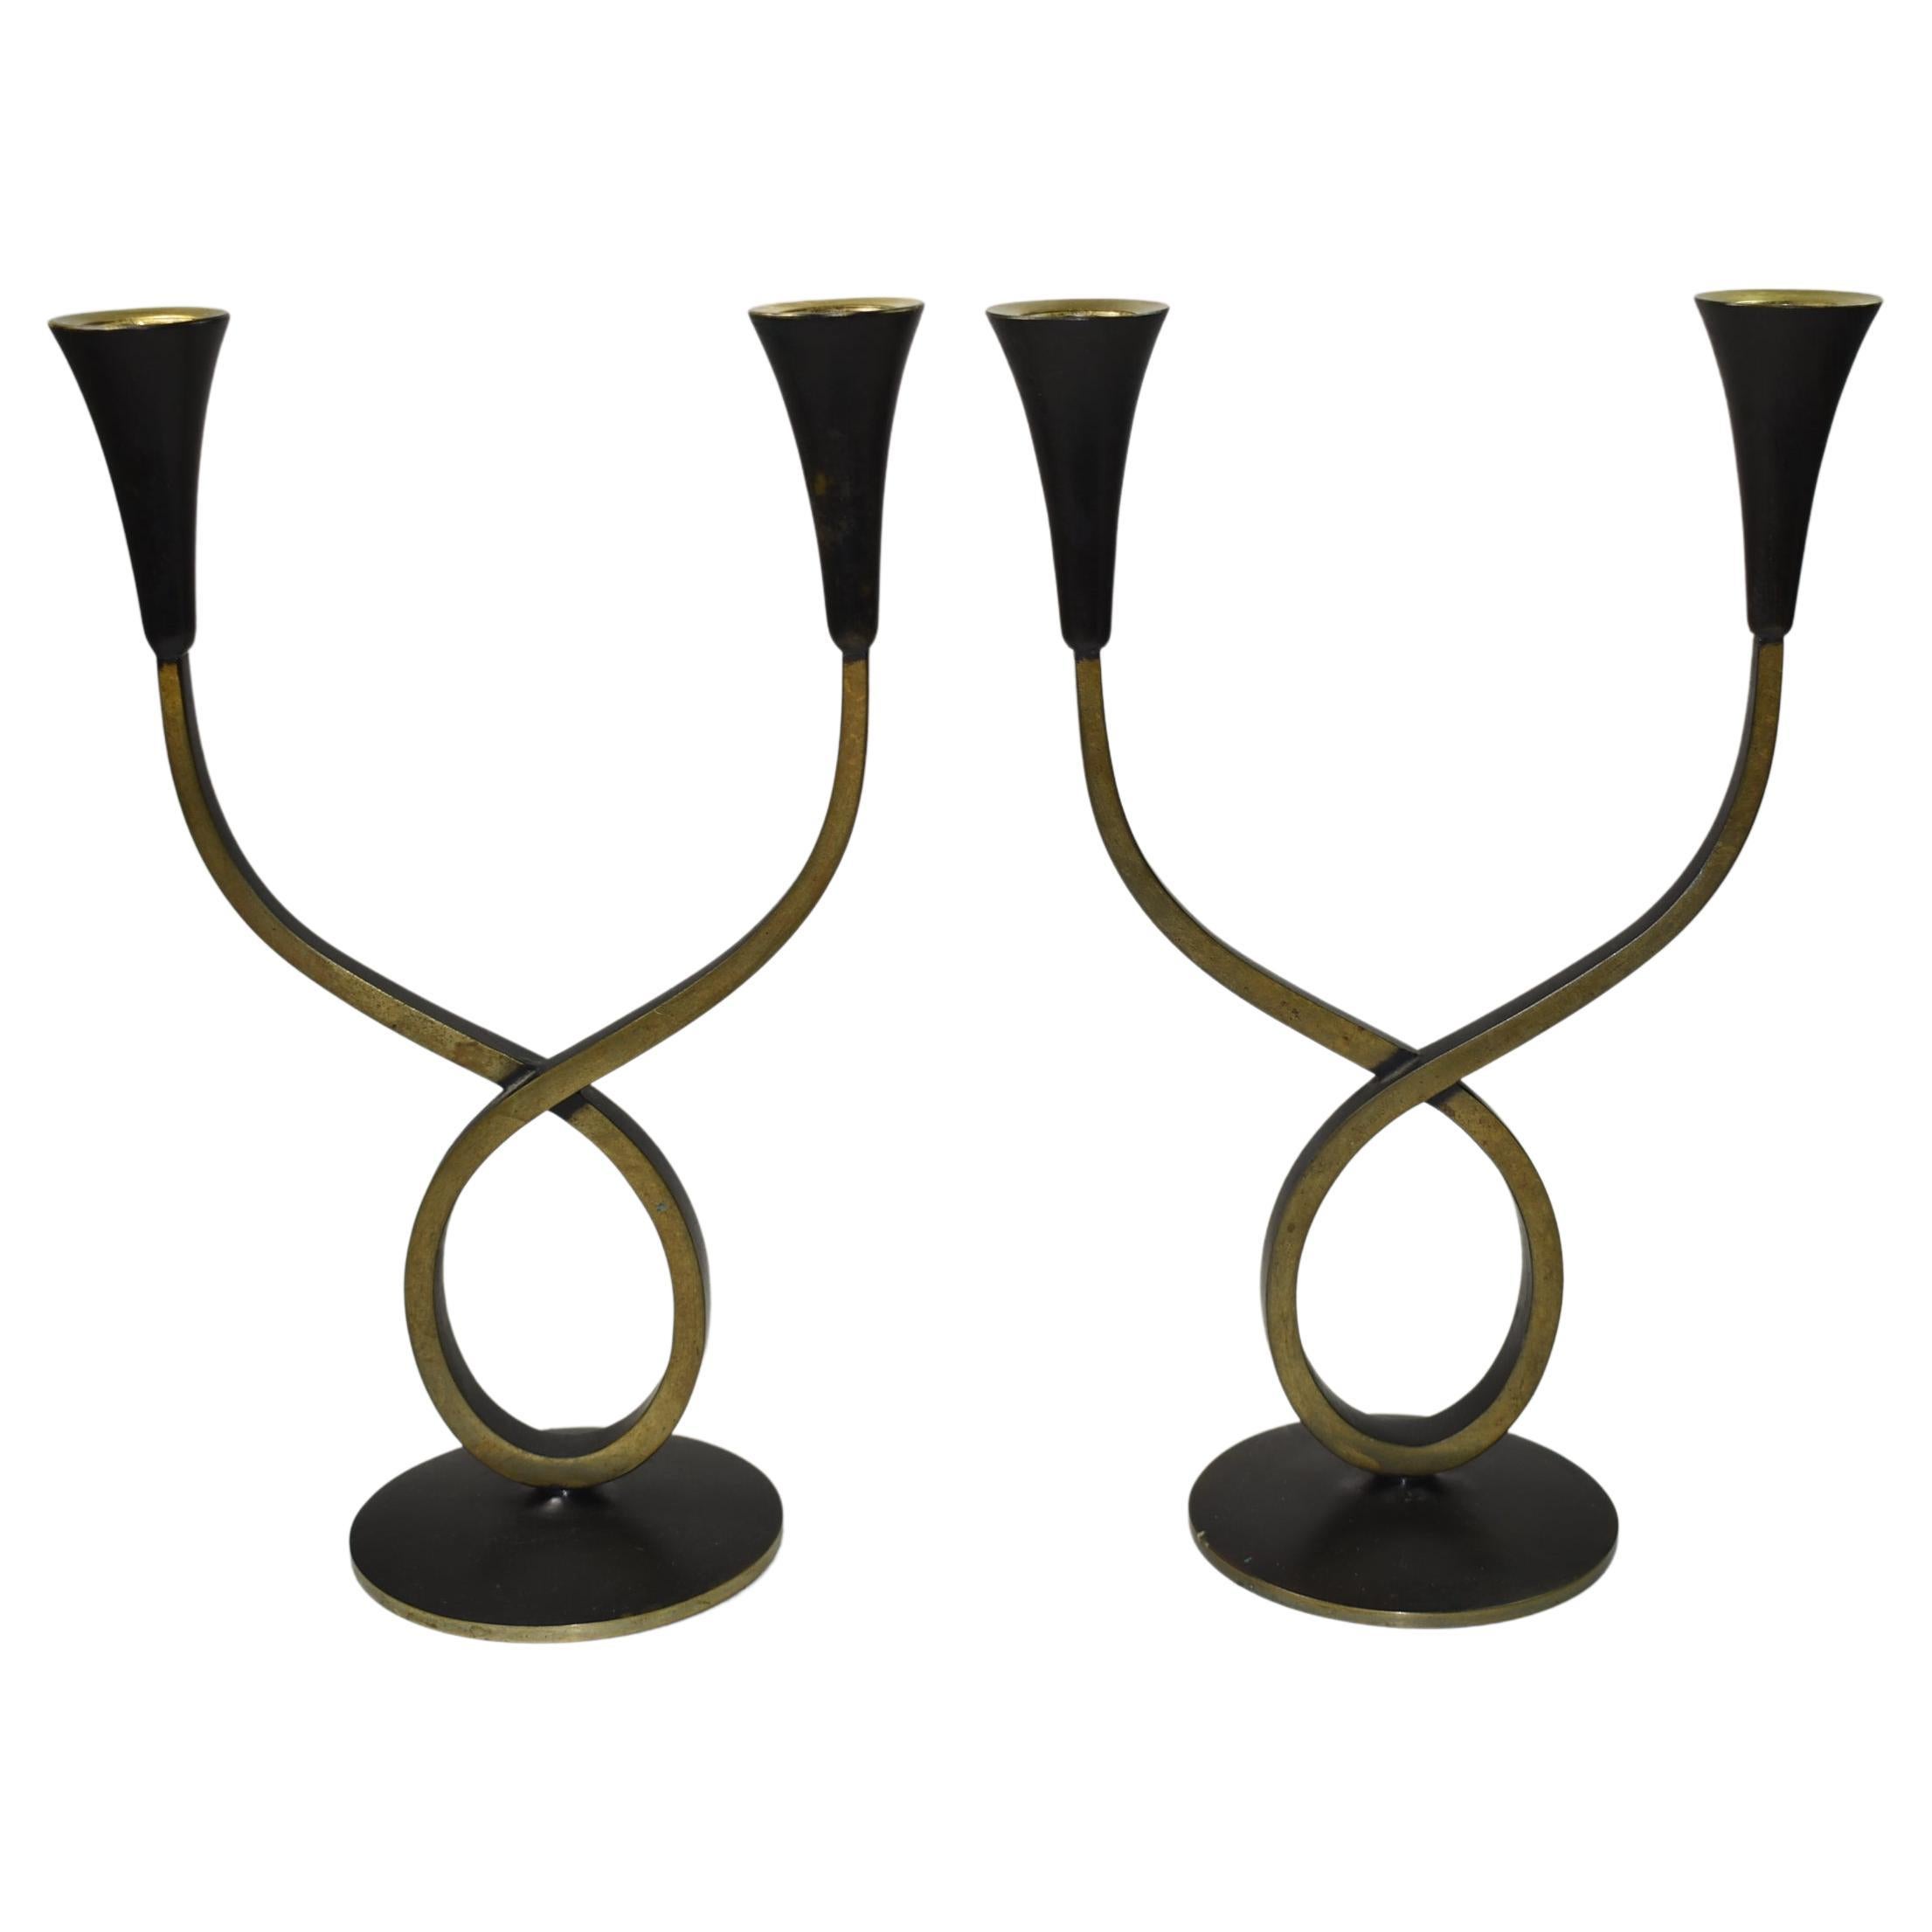 Pair of Brass Double Arm Austrian Candle Holders by Rena Rosenthal